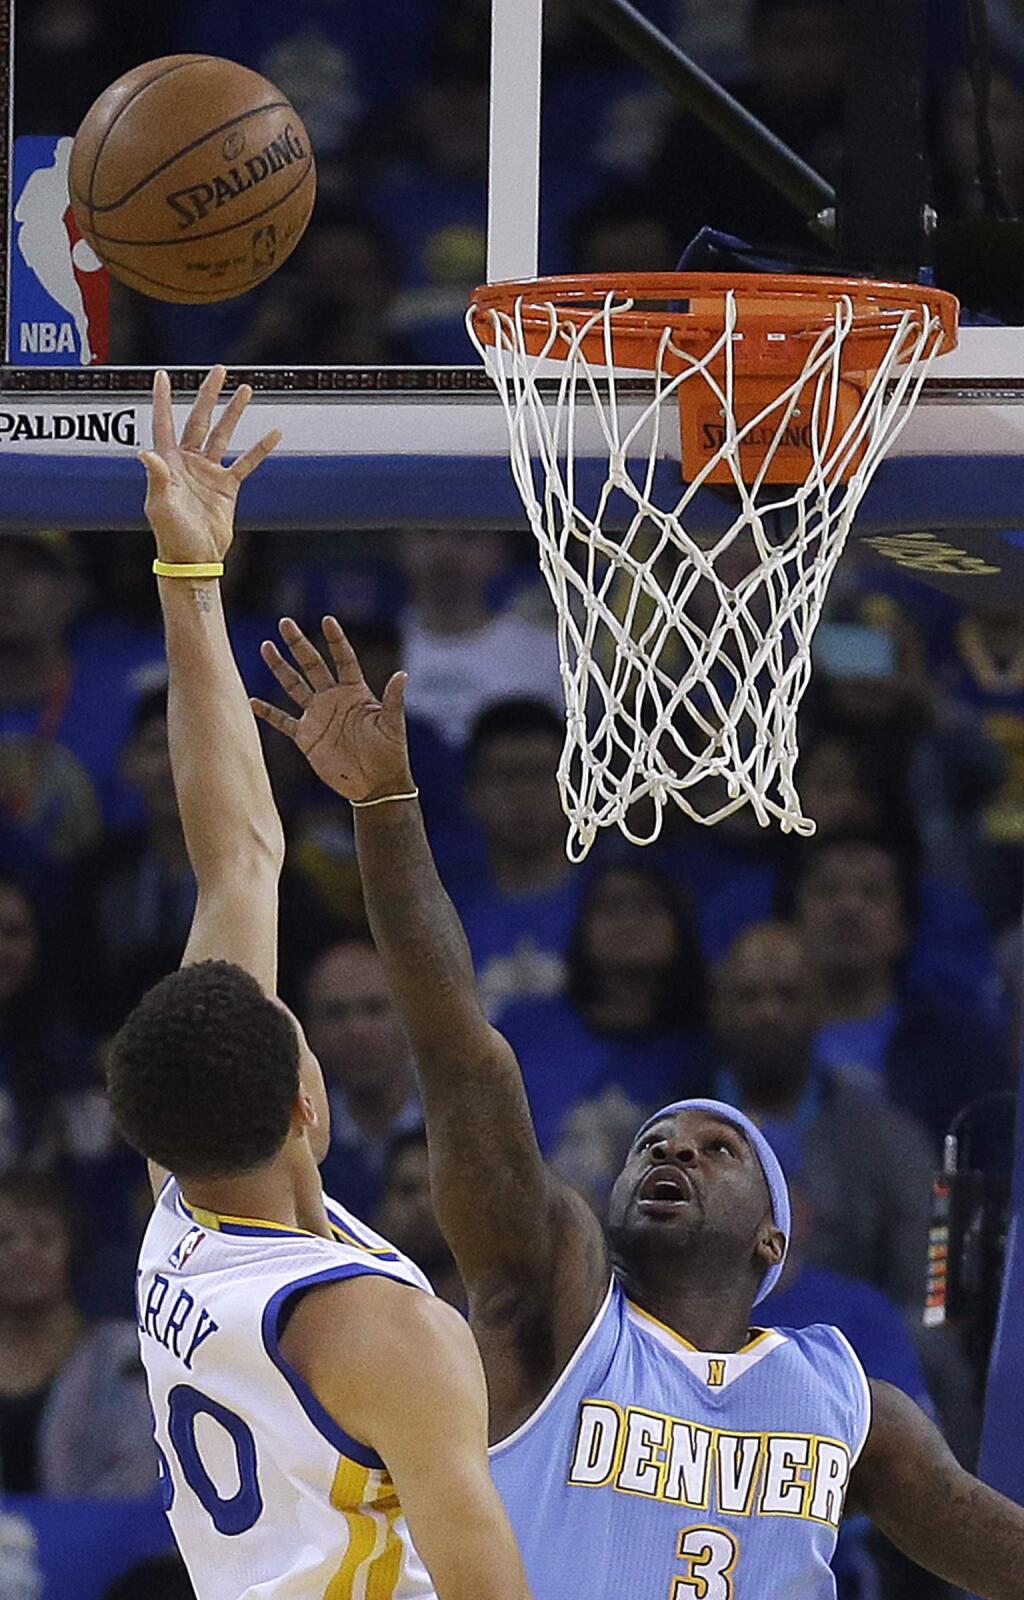 Denver Nuggets' Ty Lawson, right, defends against a shot by Golden State Warriors' Stephen Curry (30) during the first half of an NBA basketball game Wednesday, April 15, 2015, in Oakland, Calif. (AP Photo/Ben Margot)